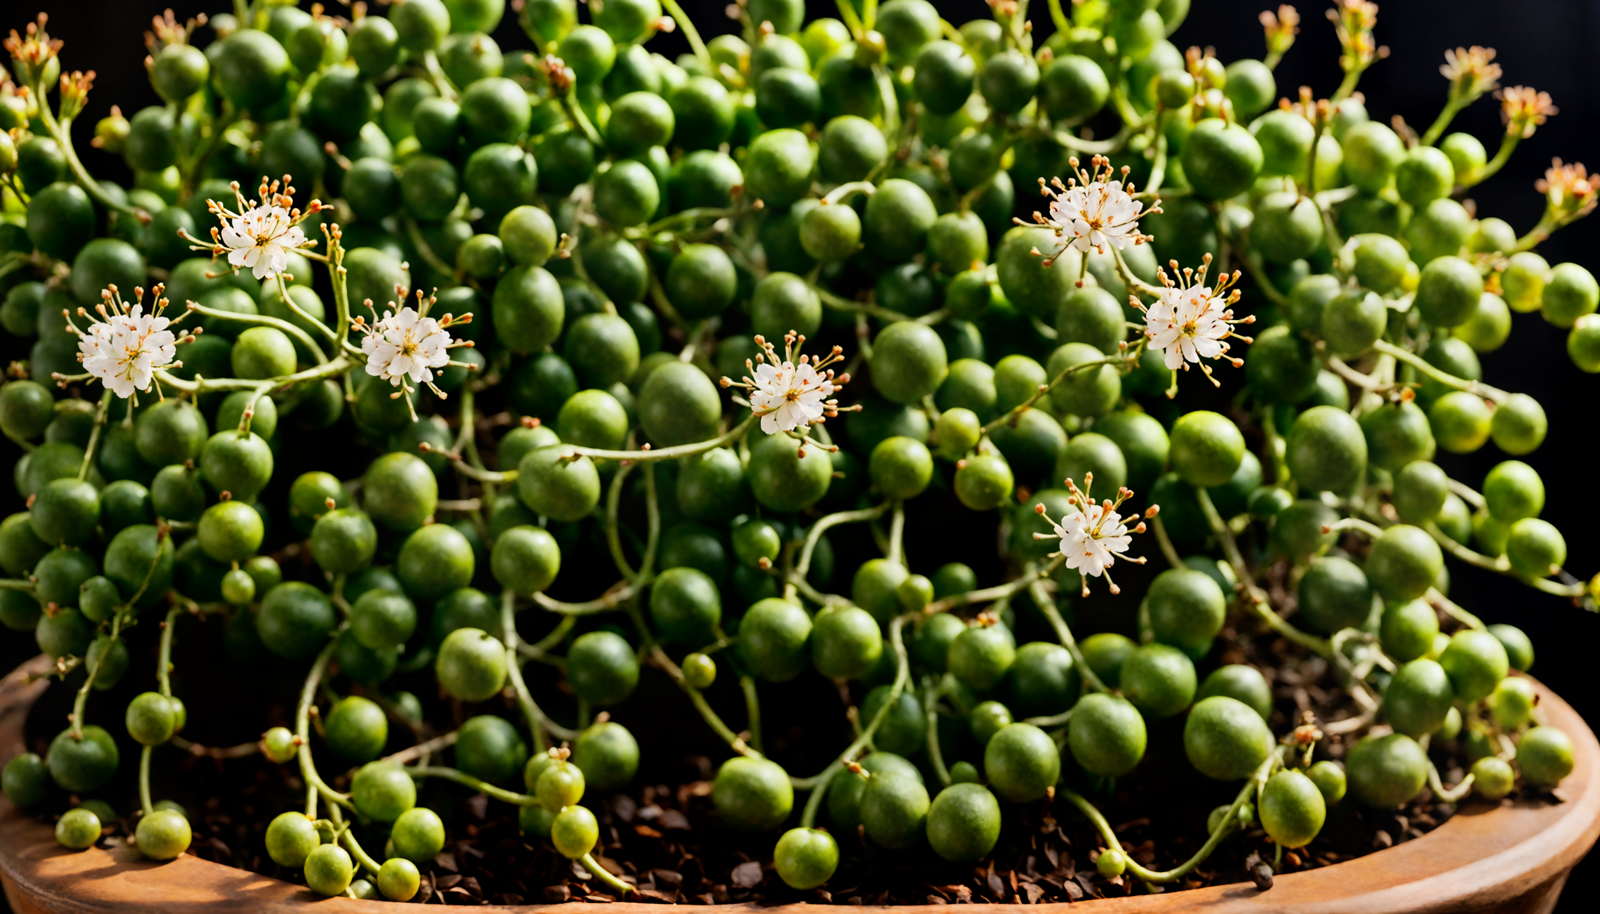 A bowl of Curio rowleyanus (String of Pearls) with trailing vines and spherical leaves, against a dark background.